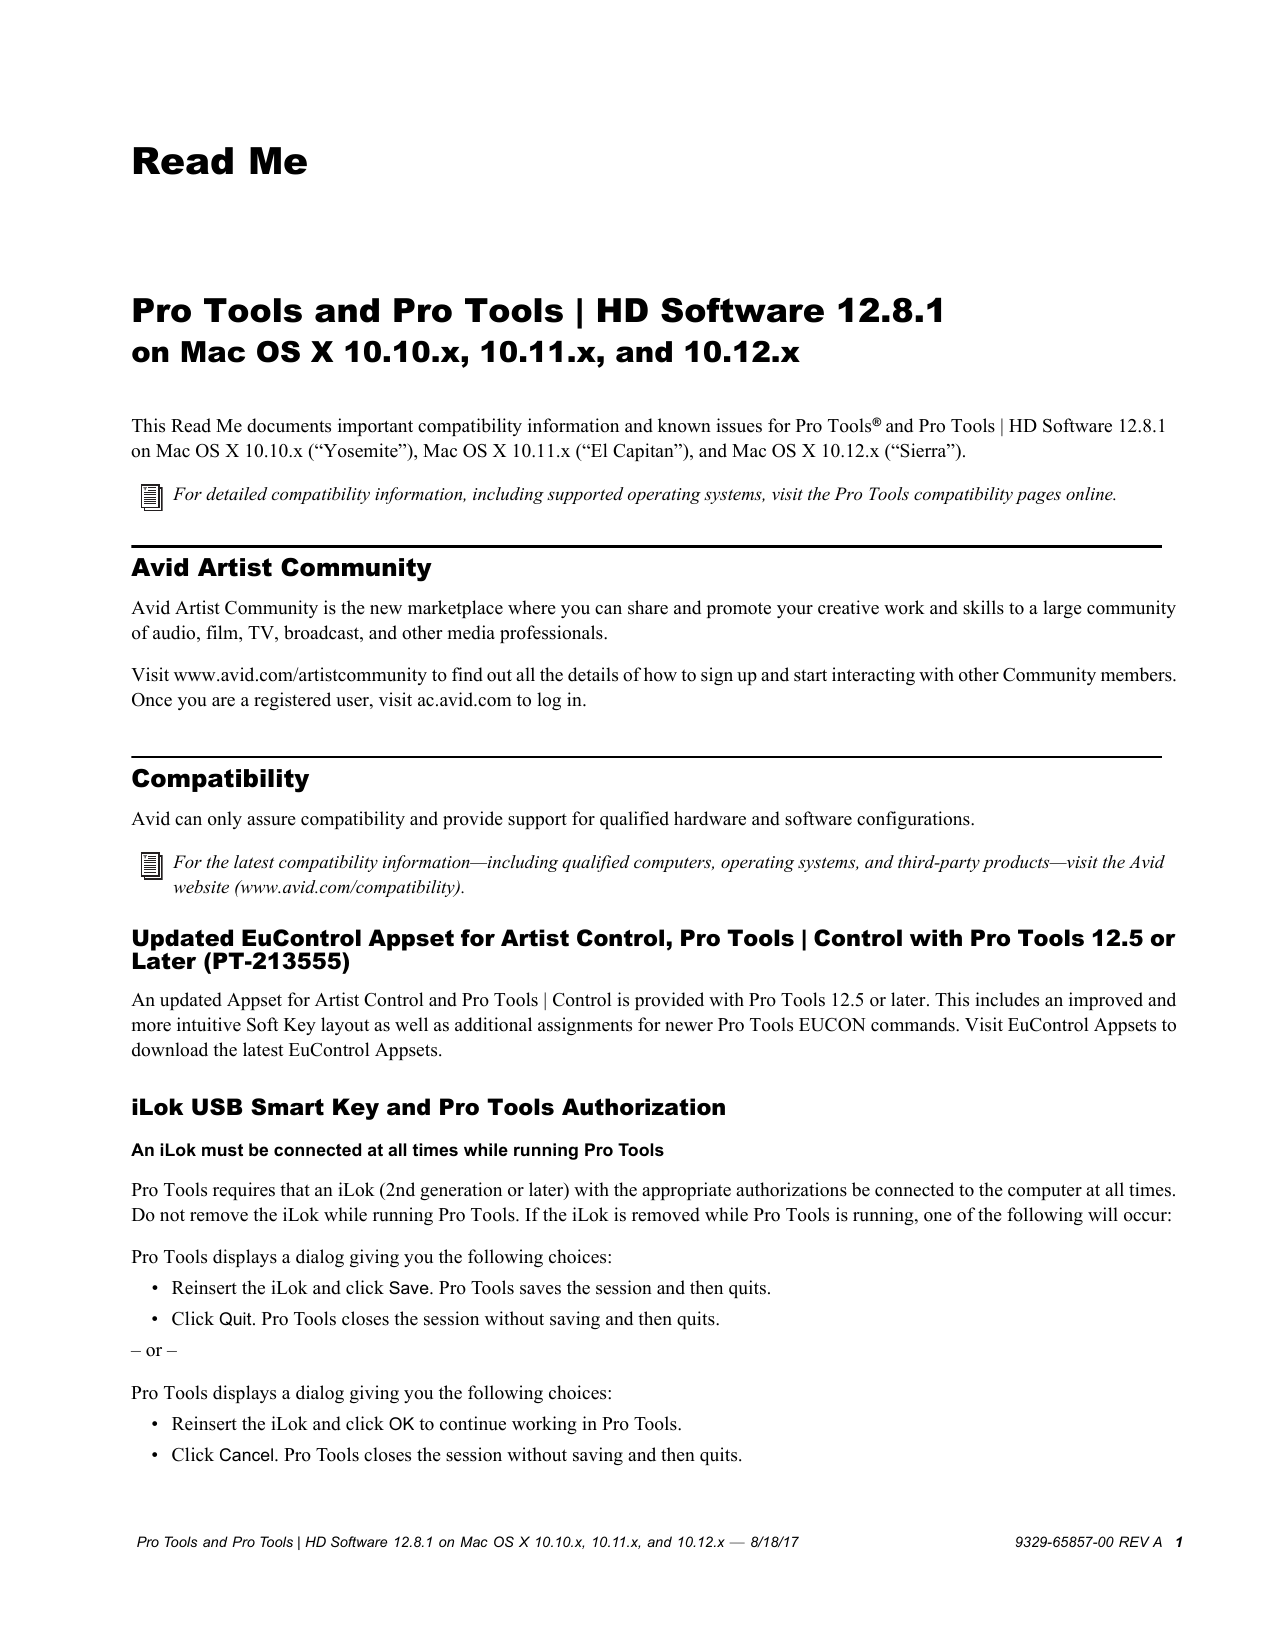 pro tools for mac os x 10.10.5